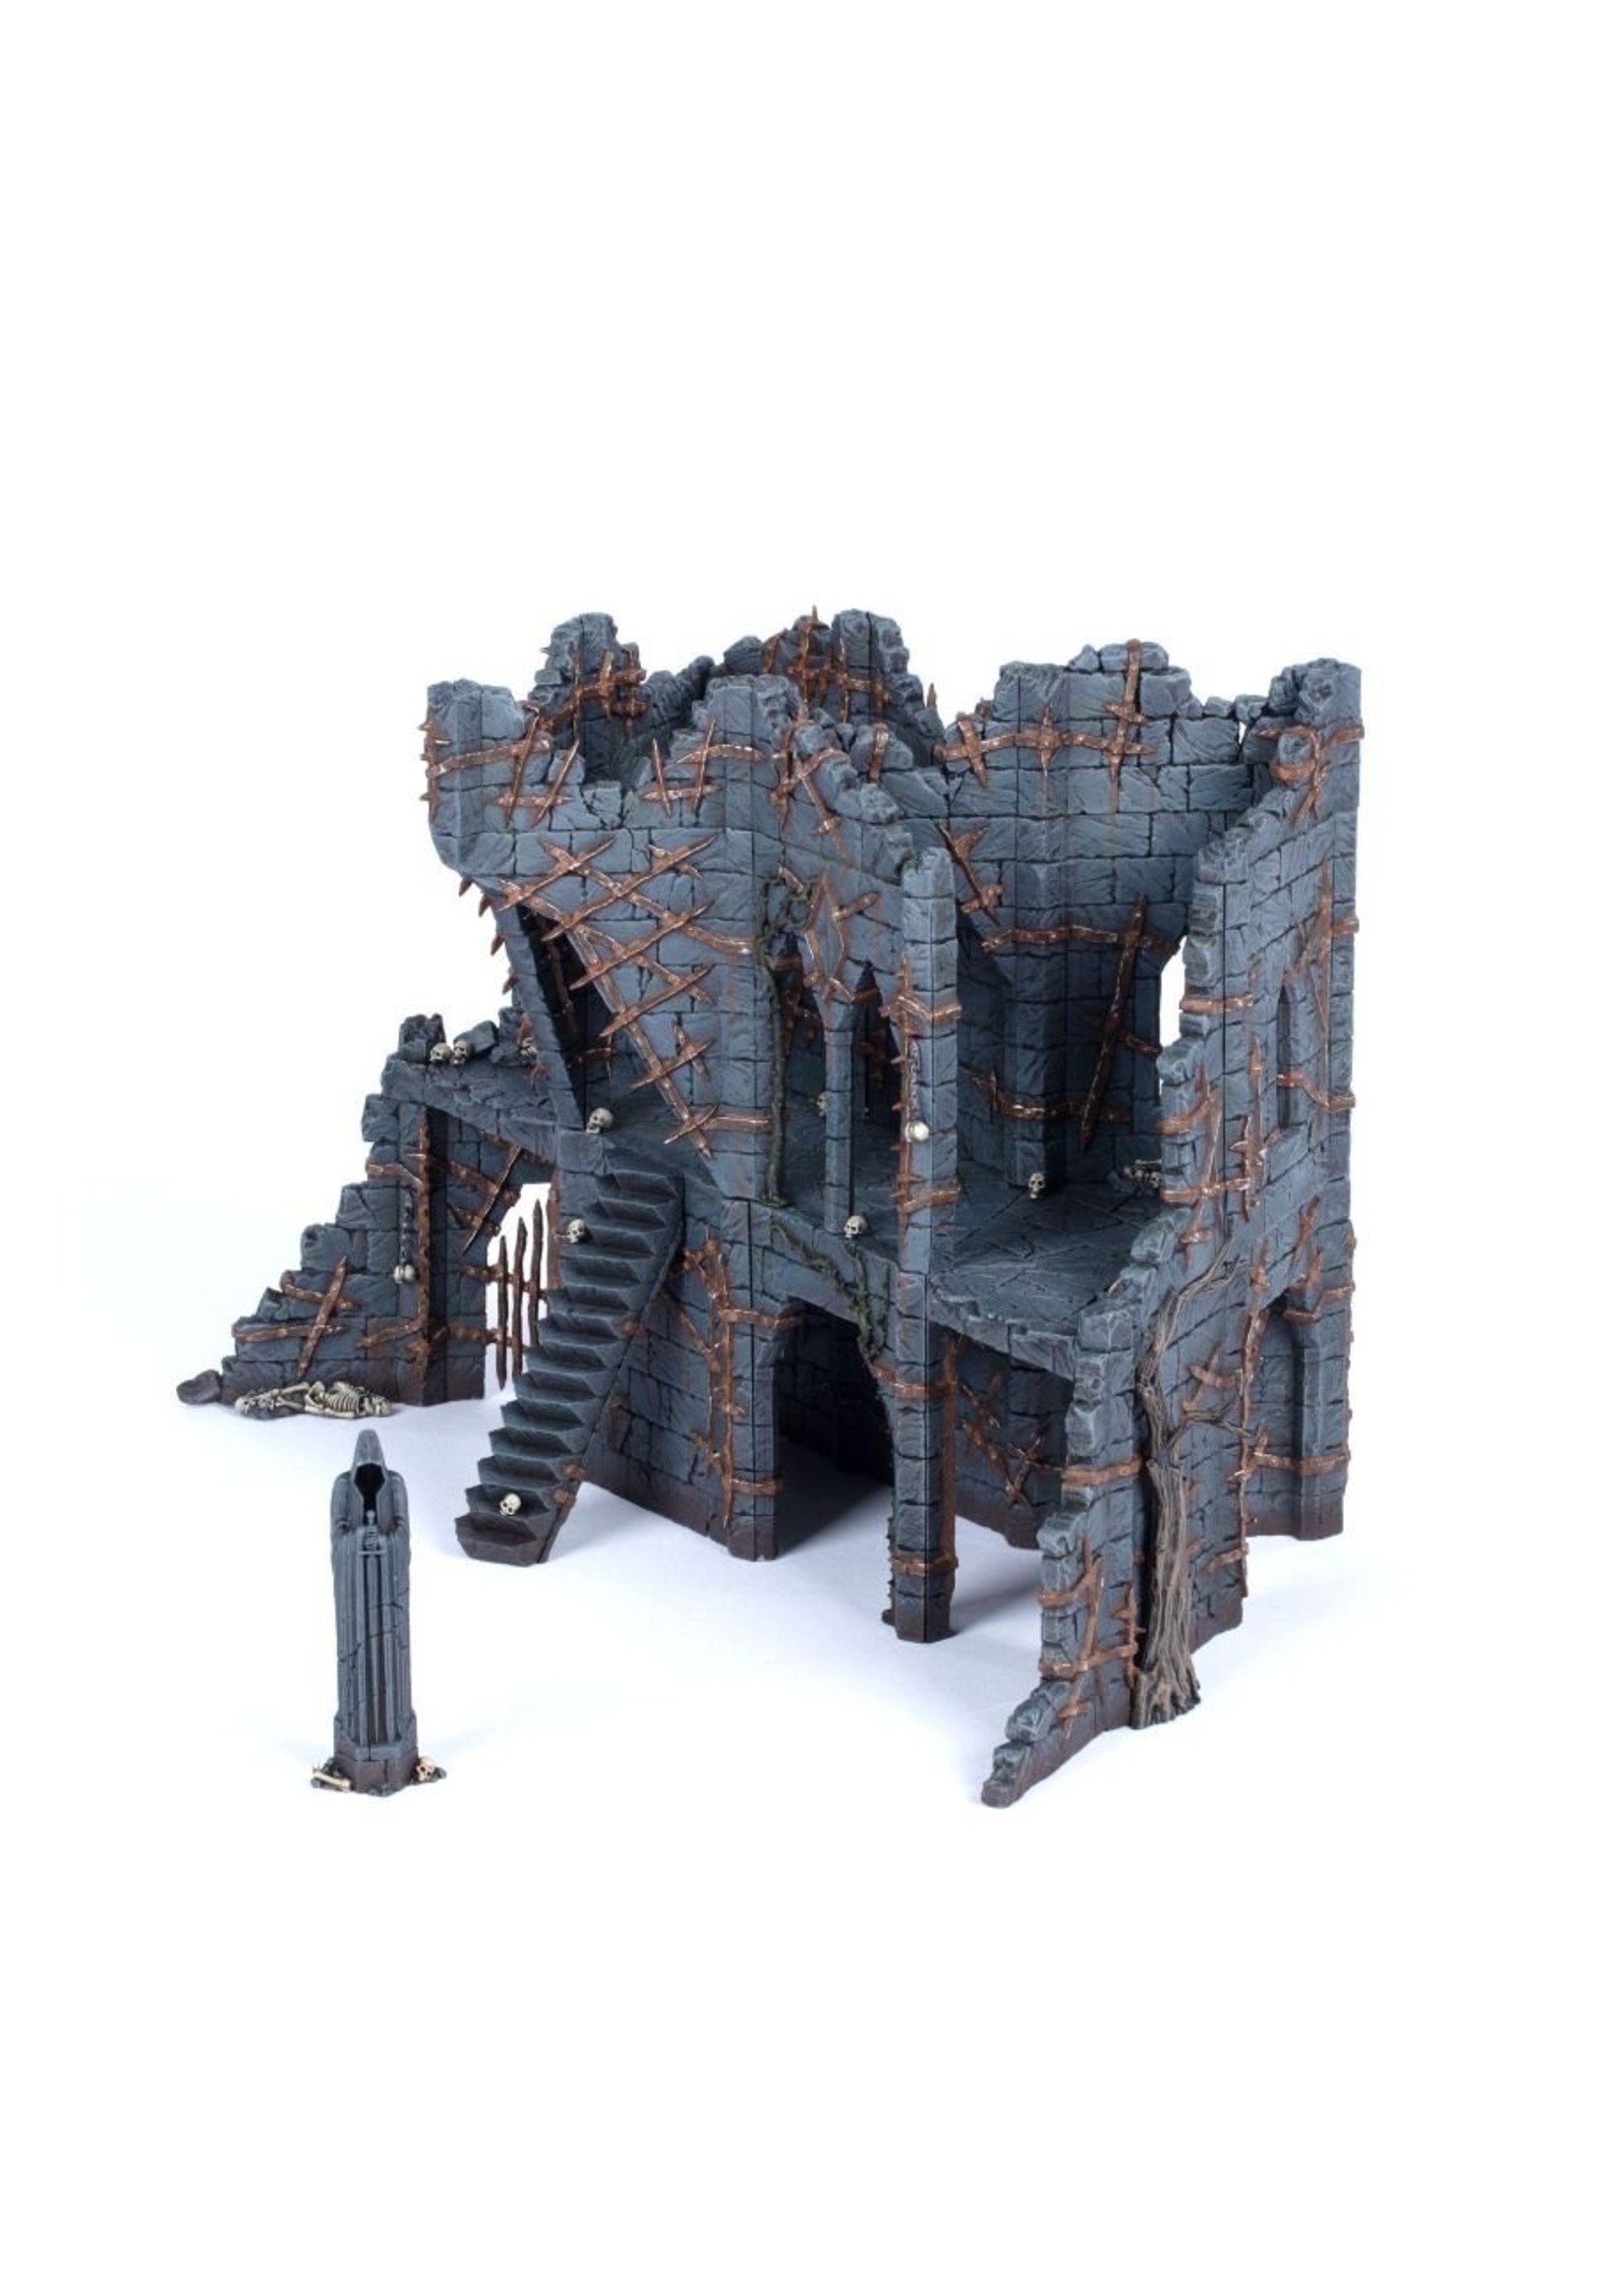 Games Workshop Middle-Earth Strategy Battle Game: Ruins of Dol Guld